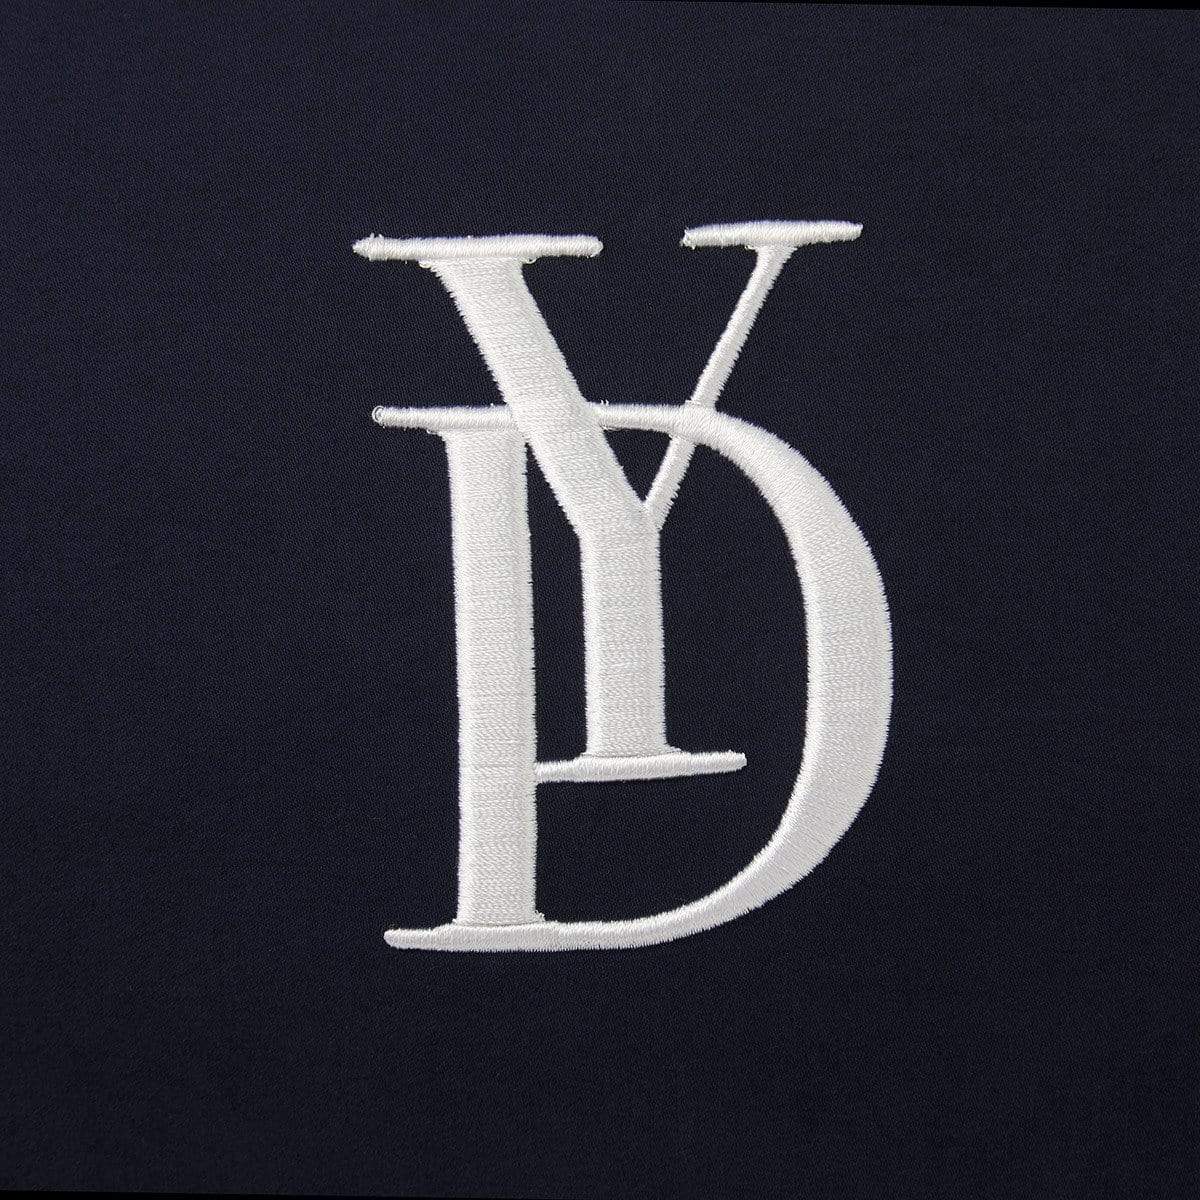 Decorative Pillows Logo Decorative Pillow by Yves Delorme Yves Delorme